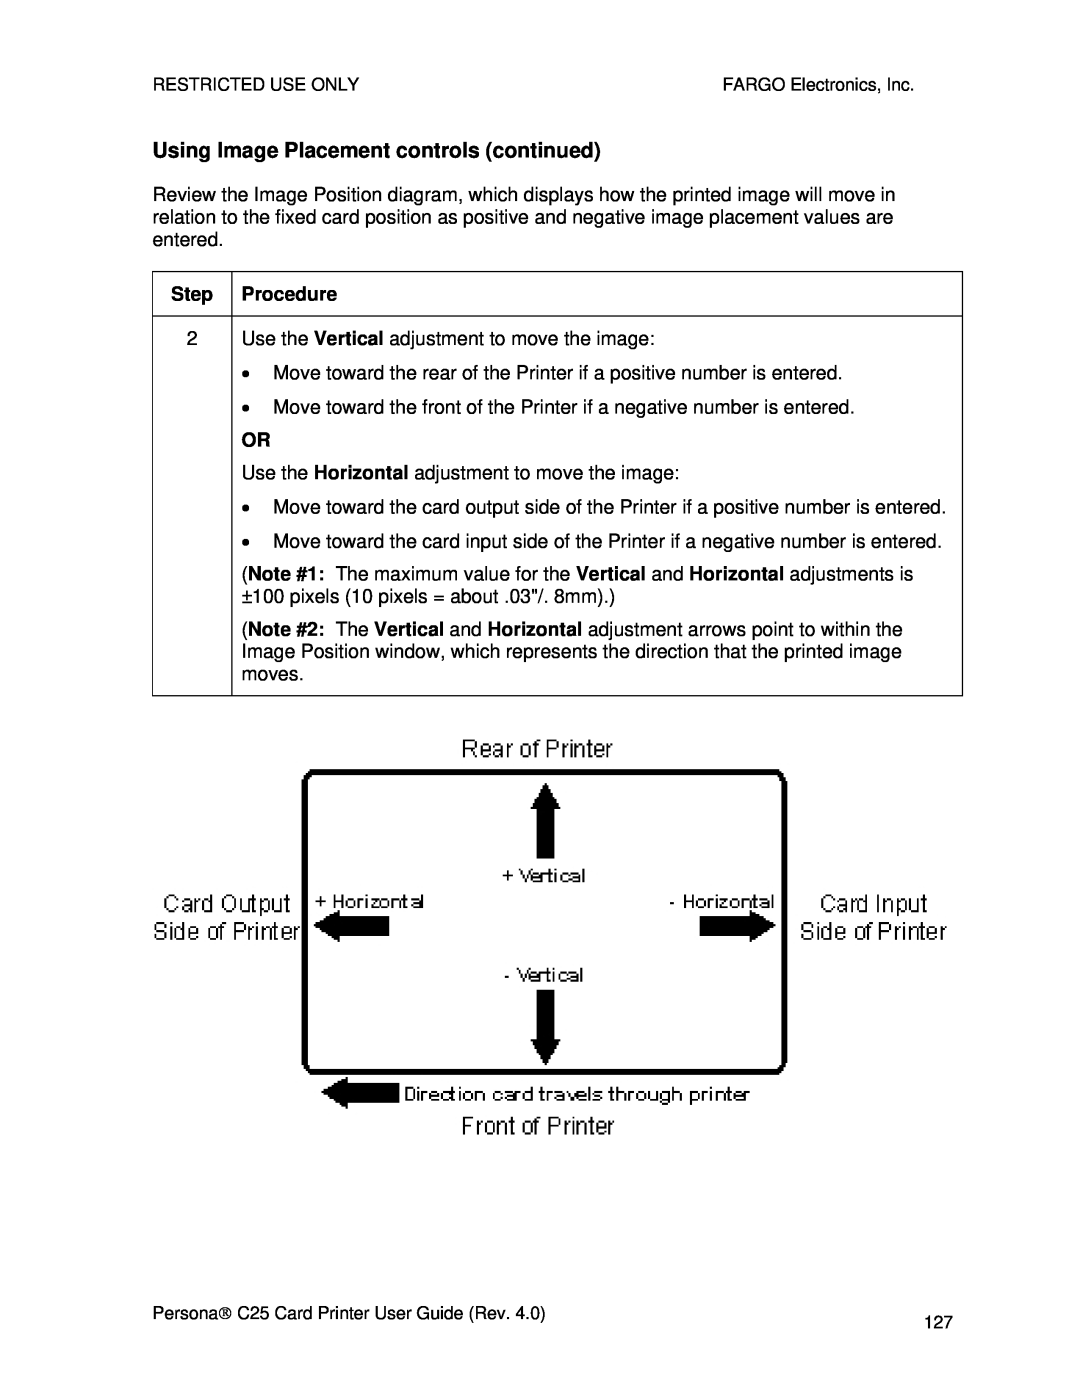 FARGO electronic S000256 manual Using Image Placement controls continued 